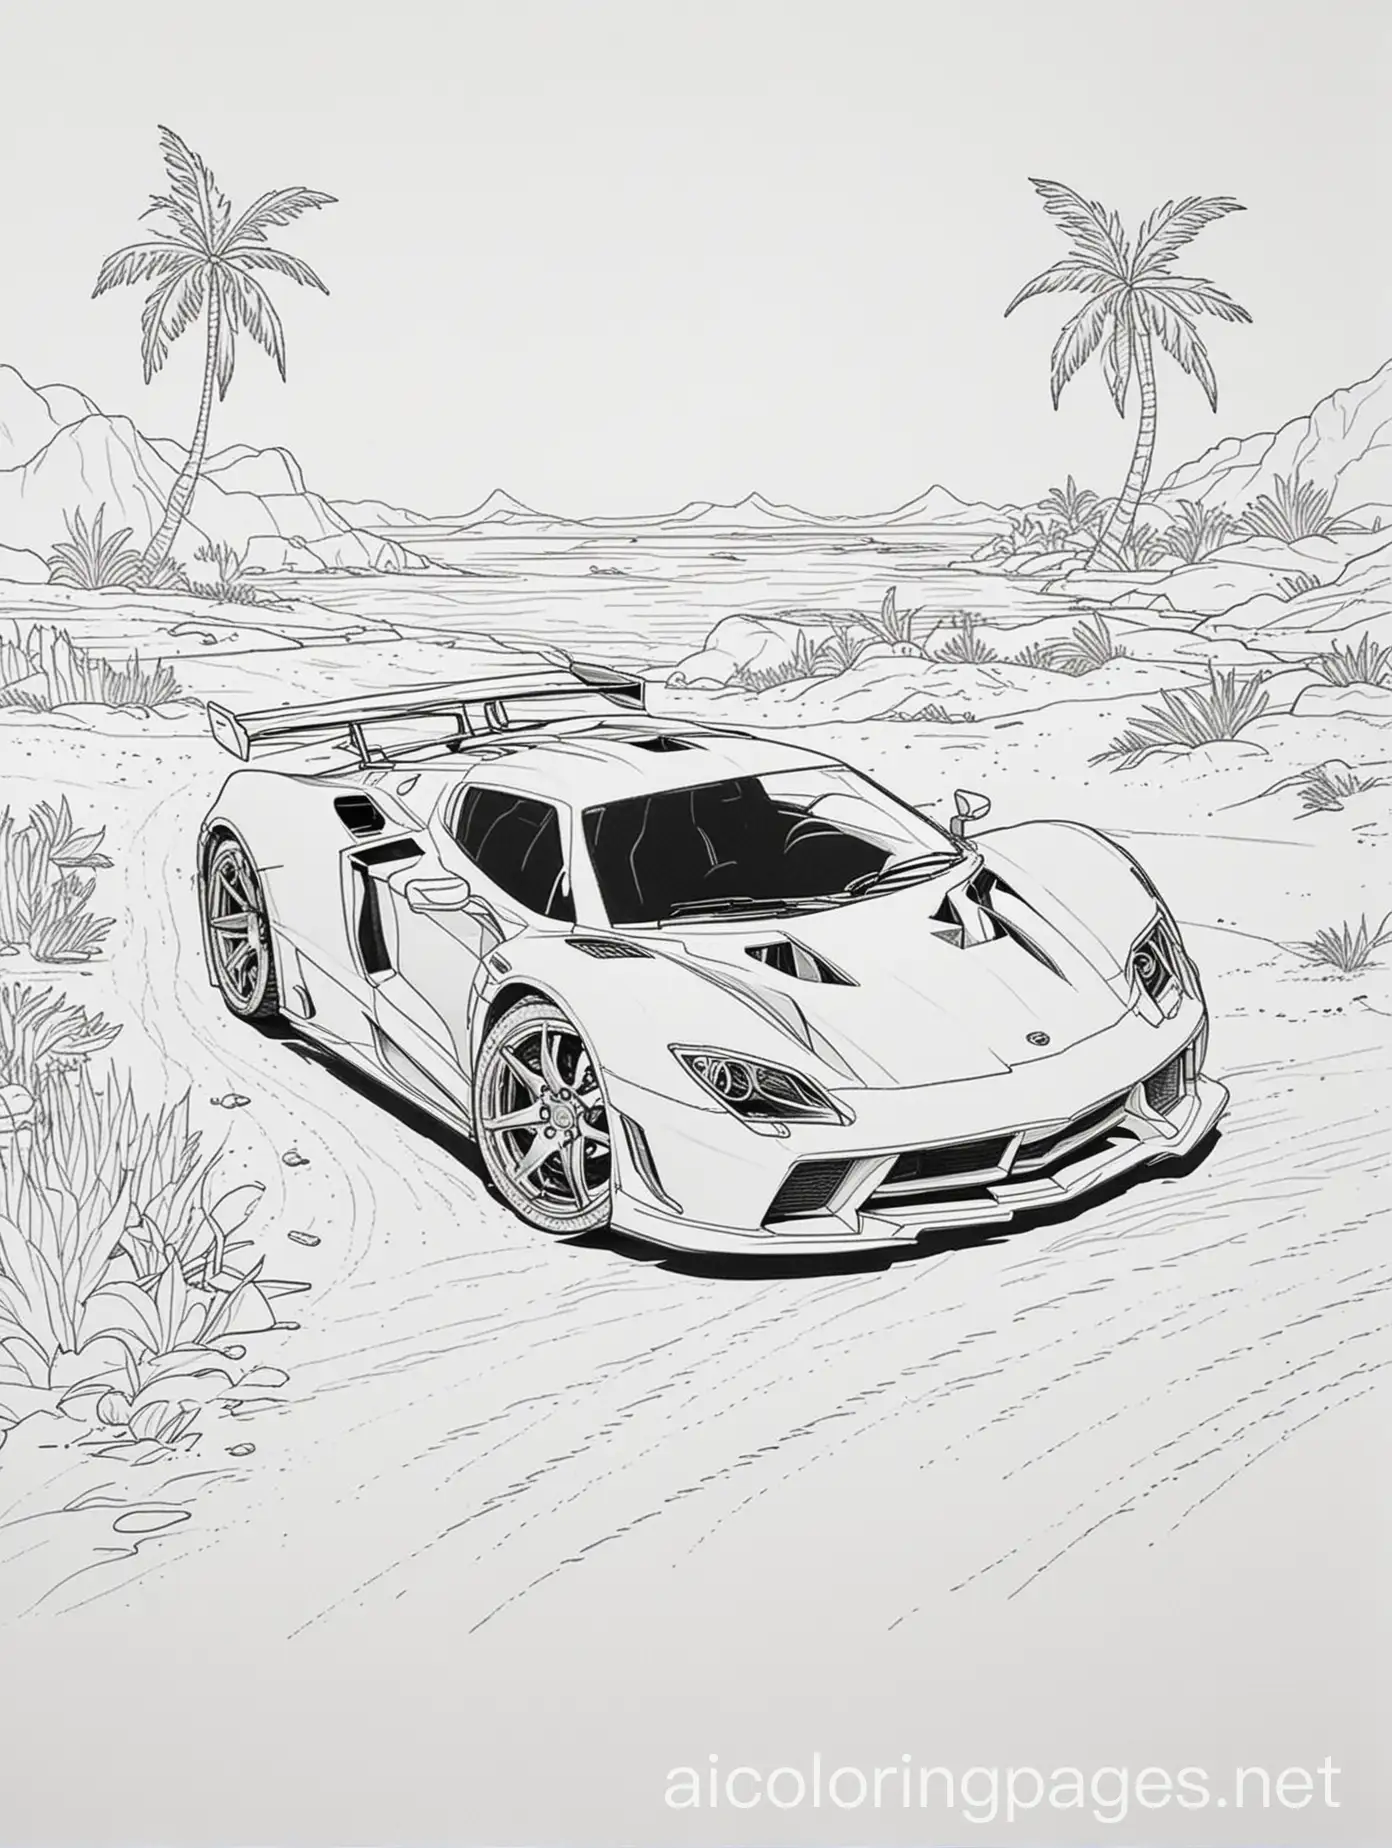 Sportscar-Coloring-Page-on-Deserted-Island